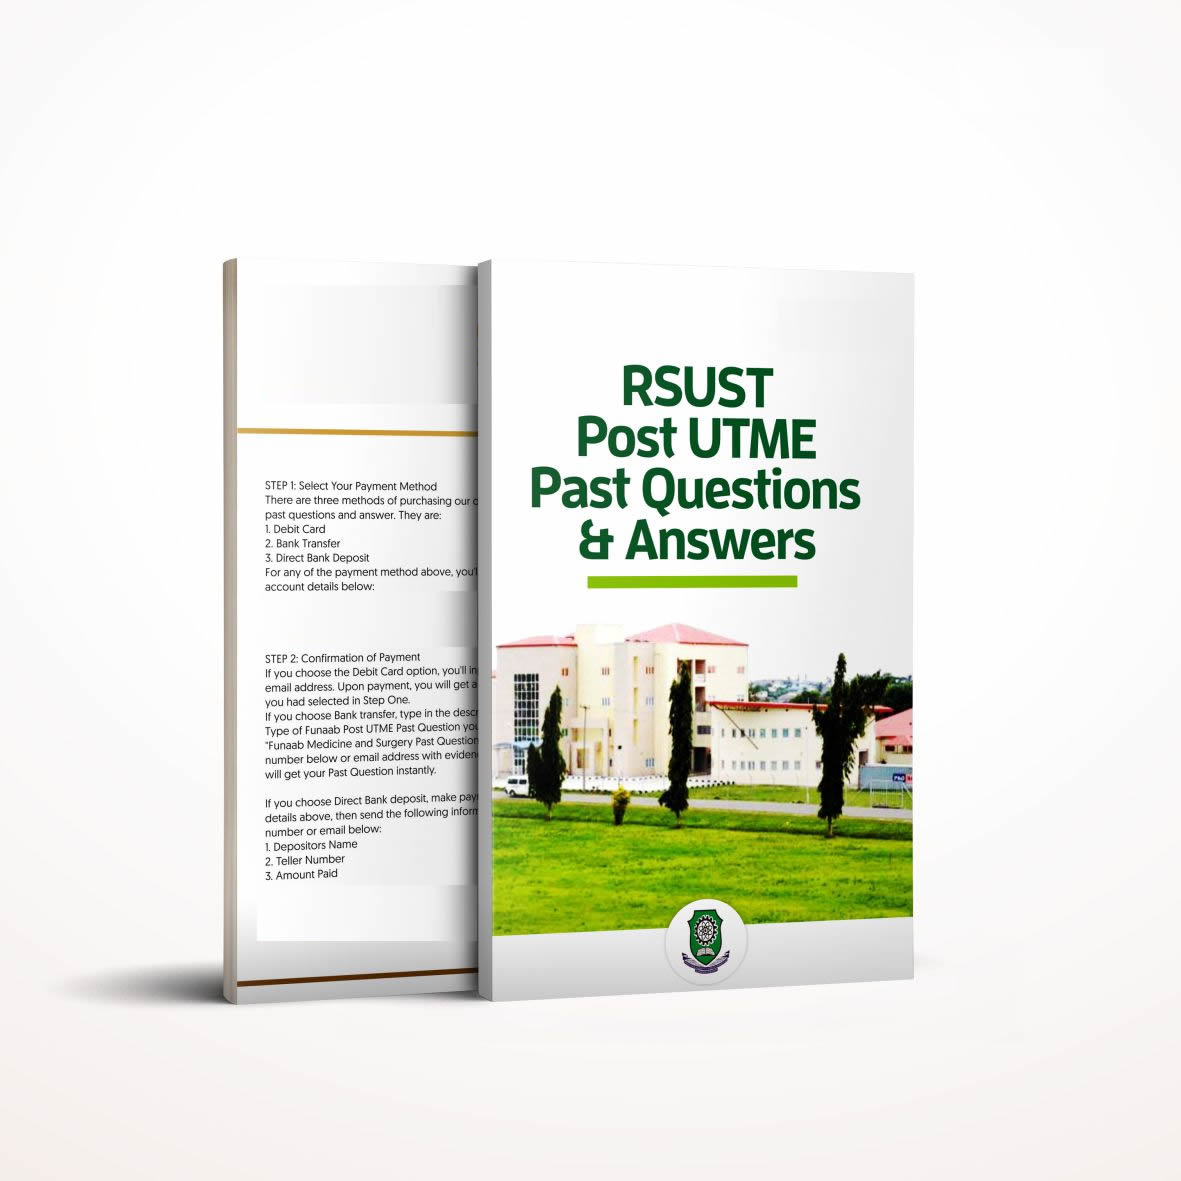 RSUST Post UTME past questions and answers